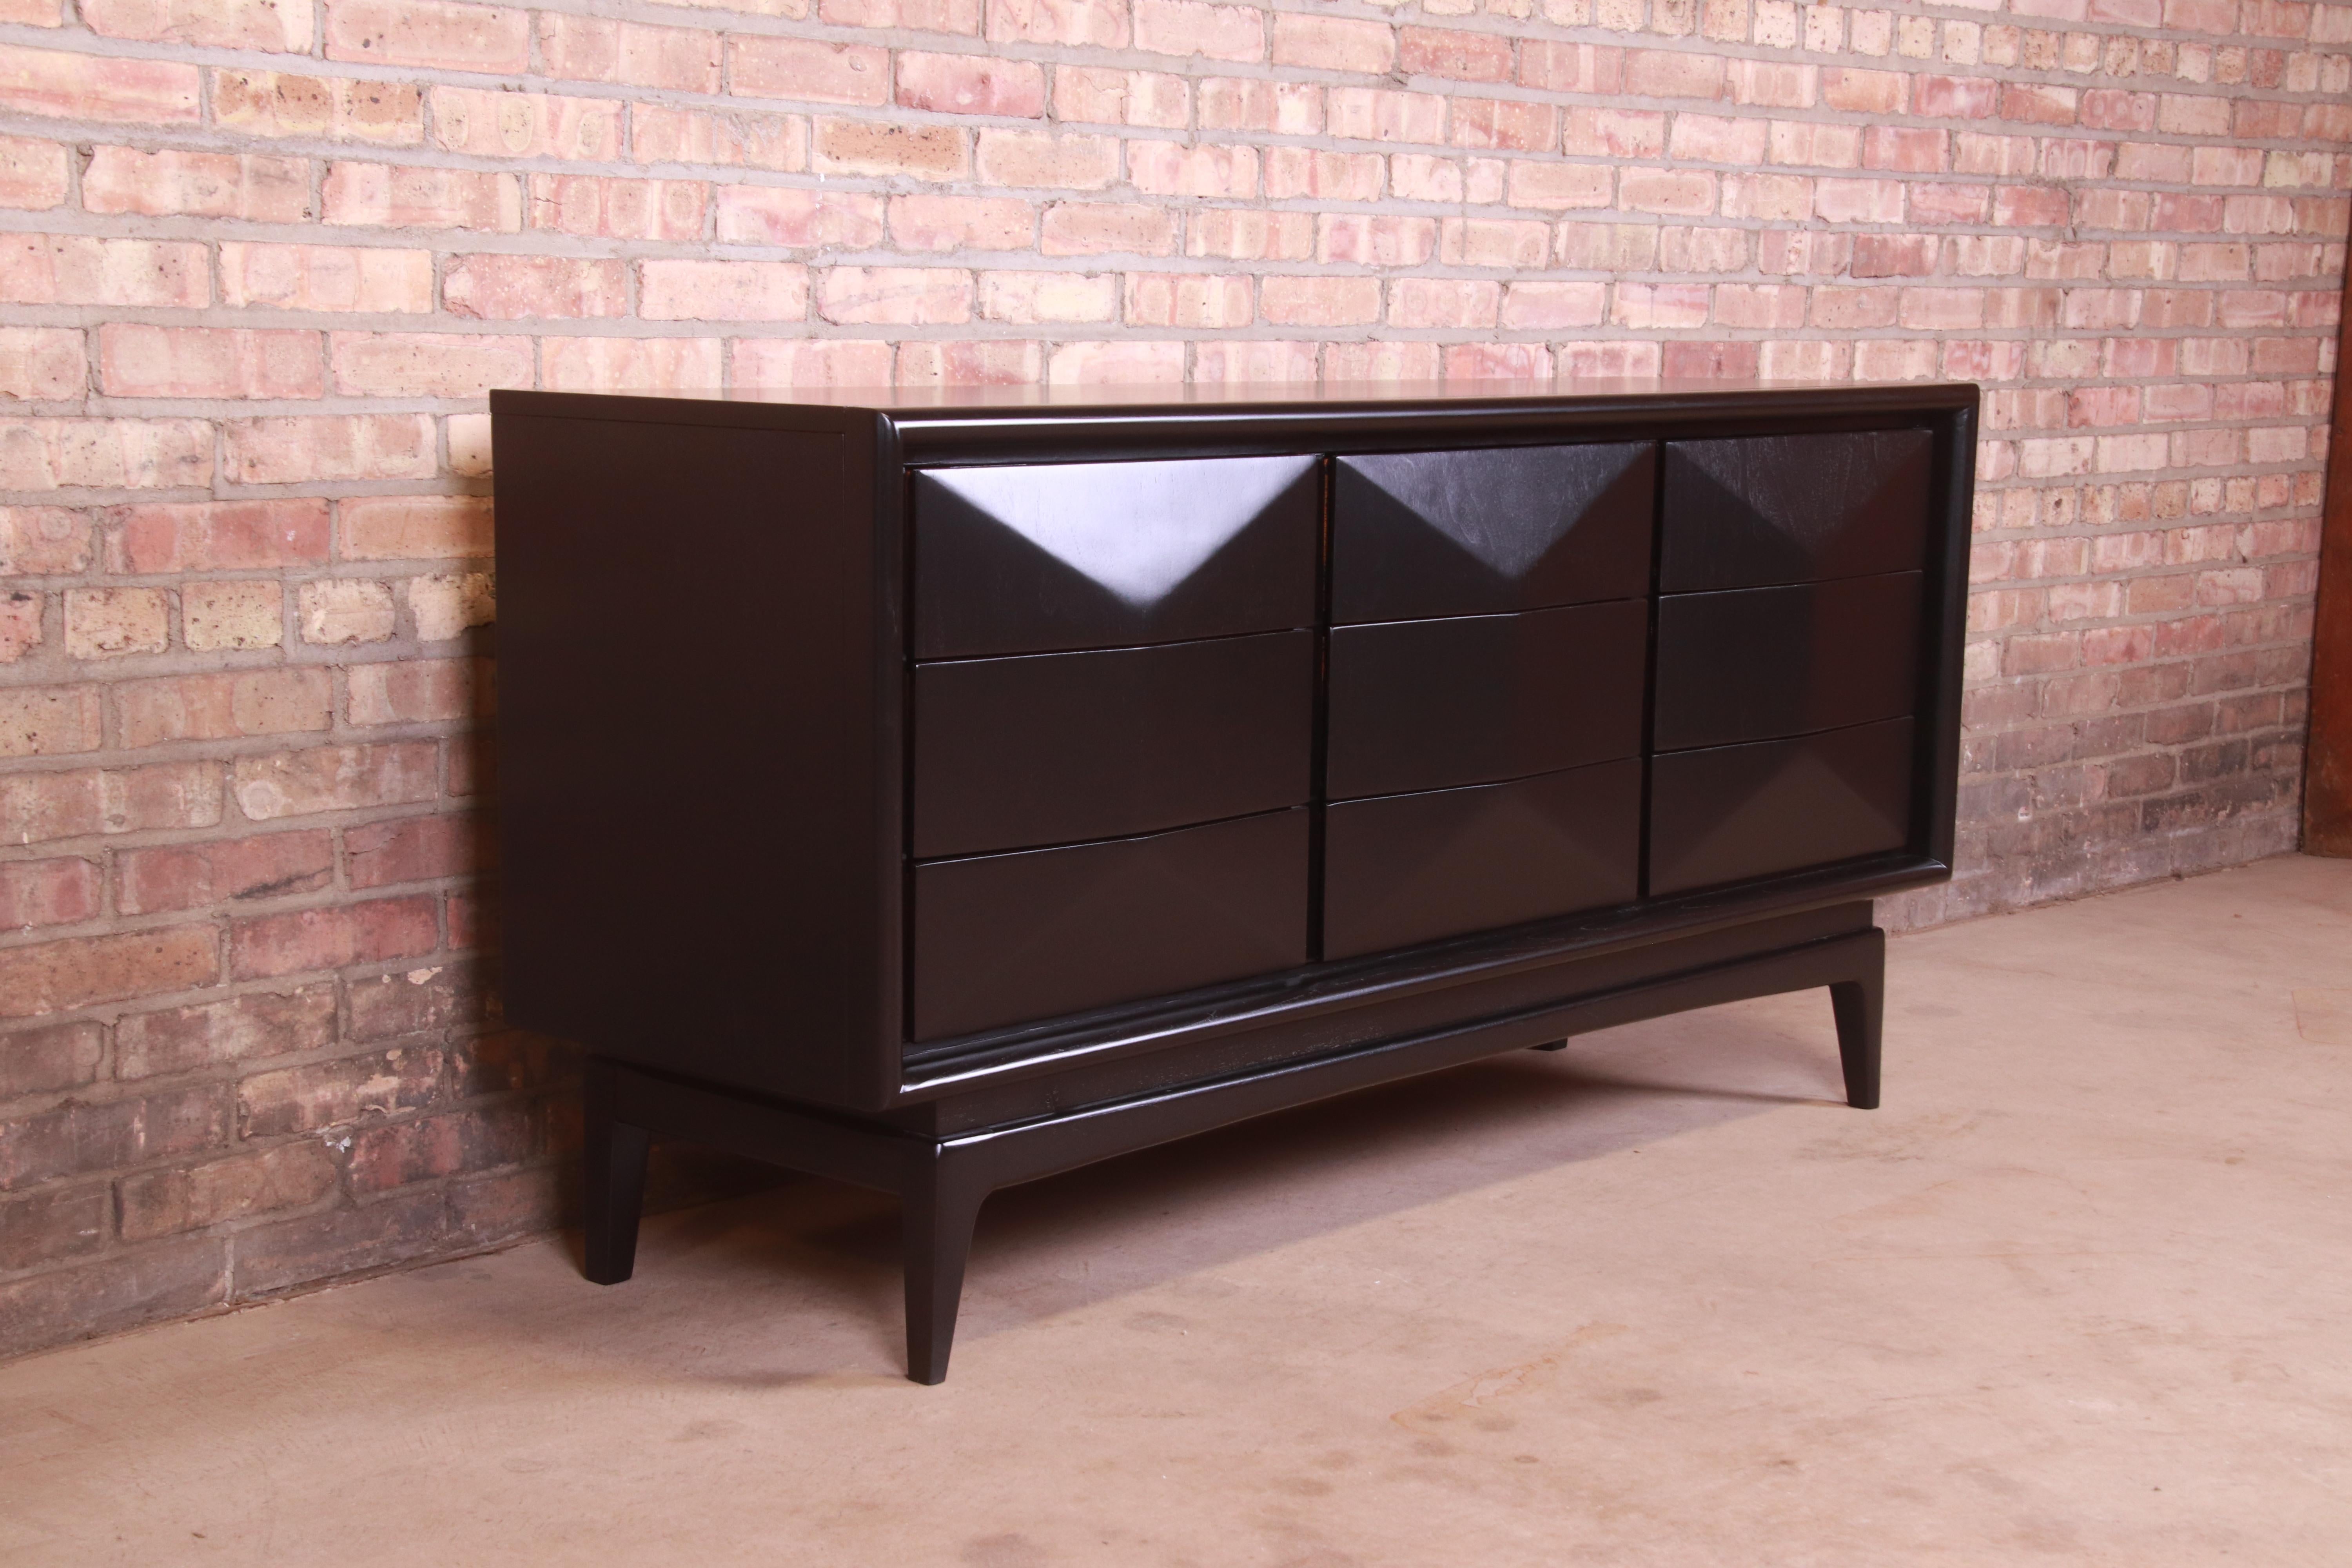 American Mid-Century Modern Black Lacquered Diamond Front Dresser or Credenza by United